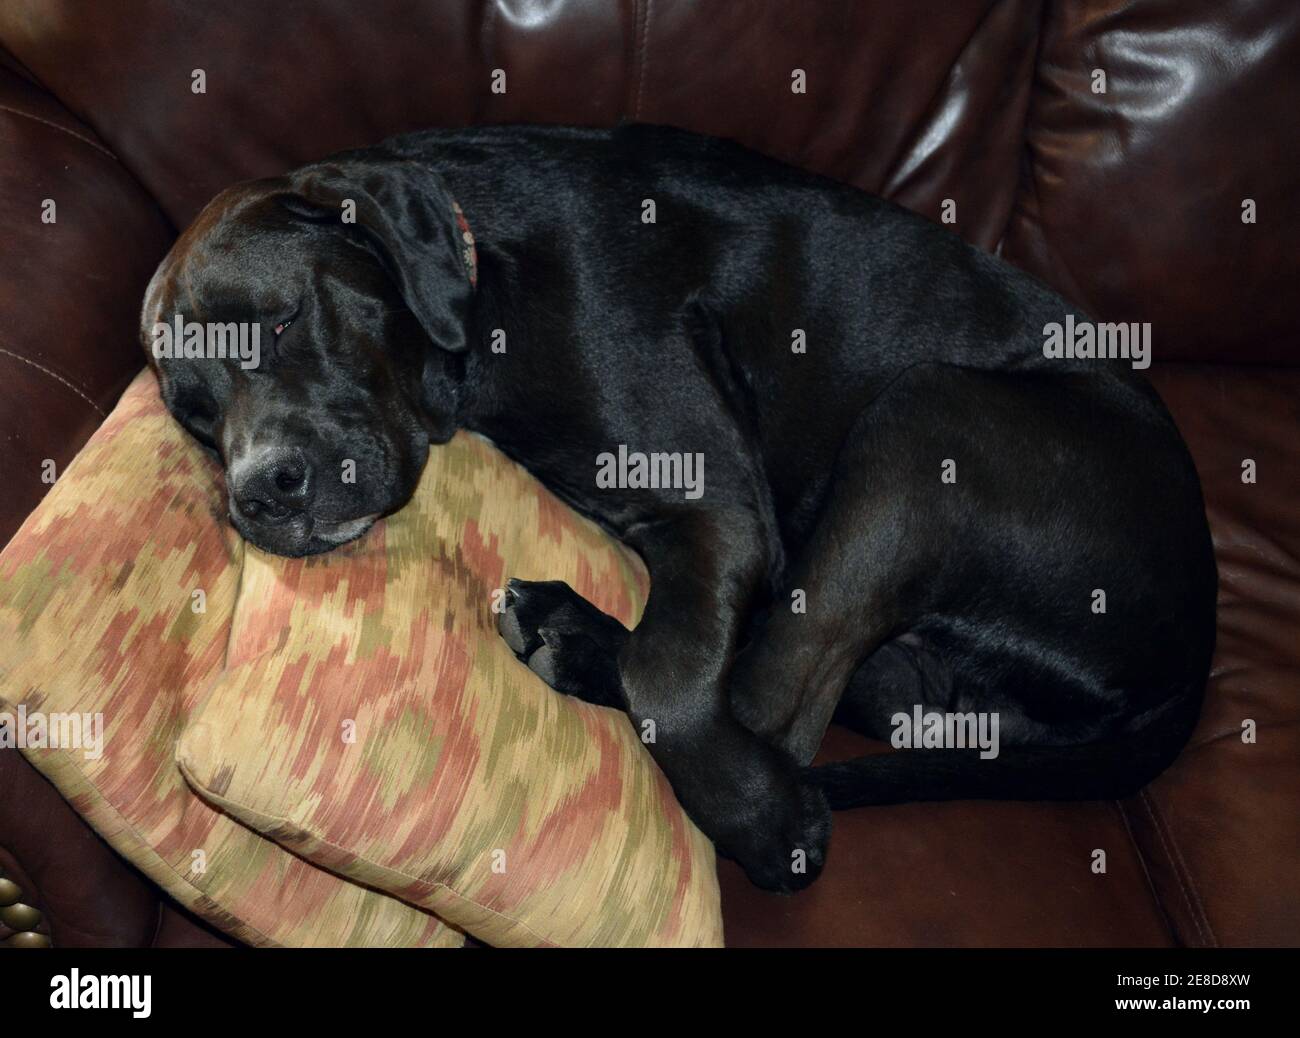 Large black dog sleeping on pillows on a leather couch. Stock Photo